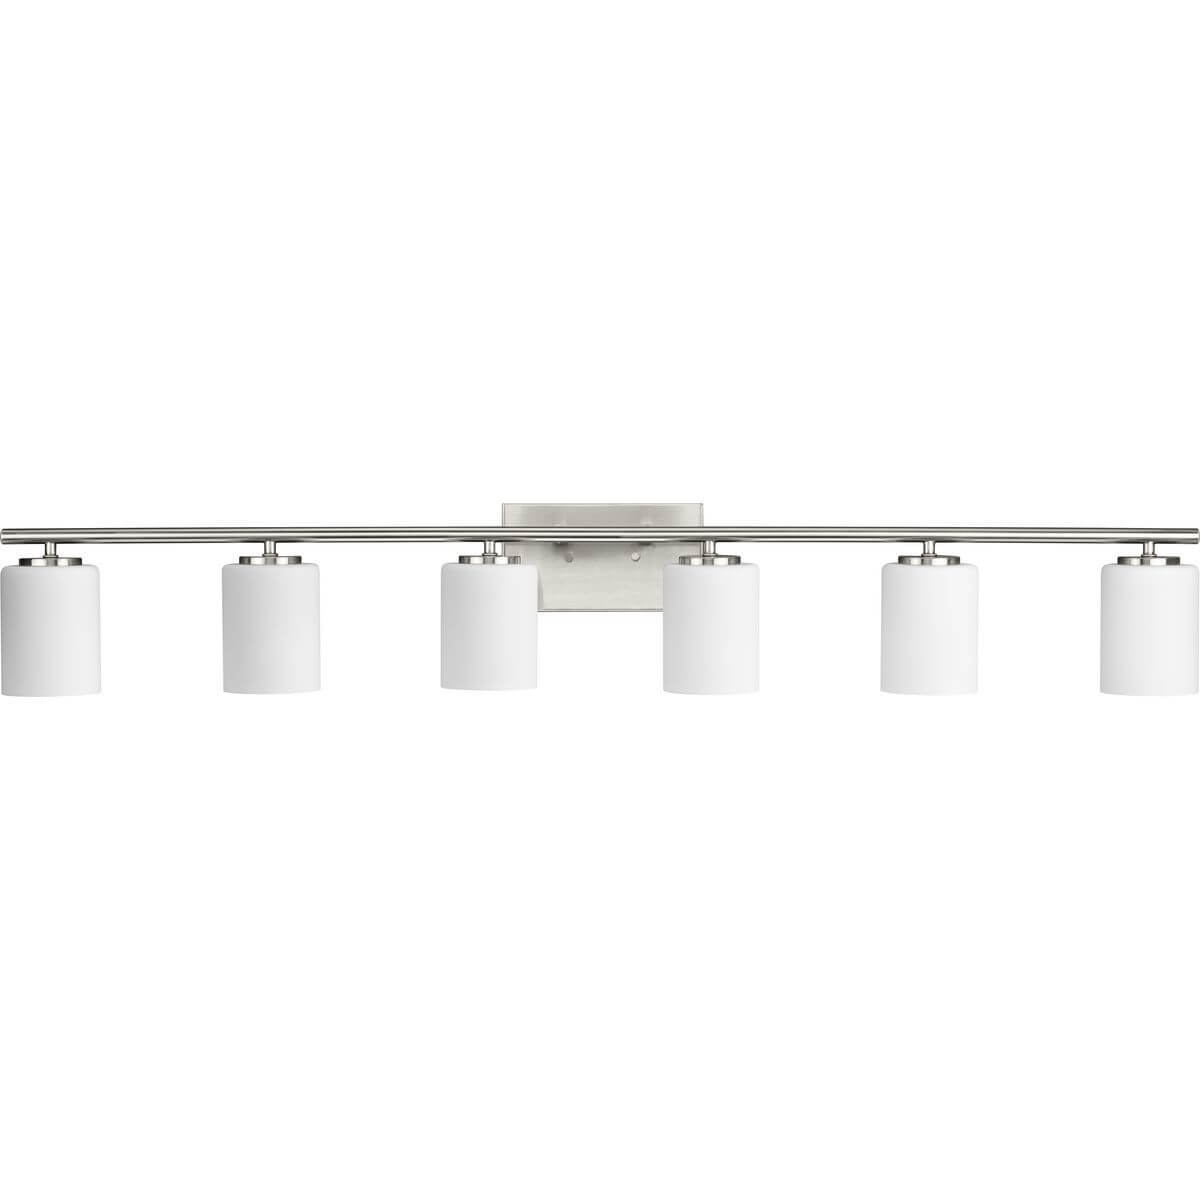 Progress Lighting Replay 6 Light 48 inch Bath Vanity Light in Brushed Nickel with Etched White Glass P300385-009